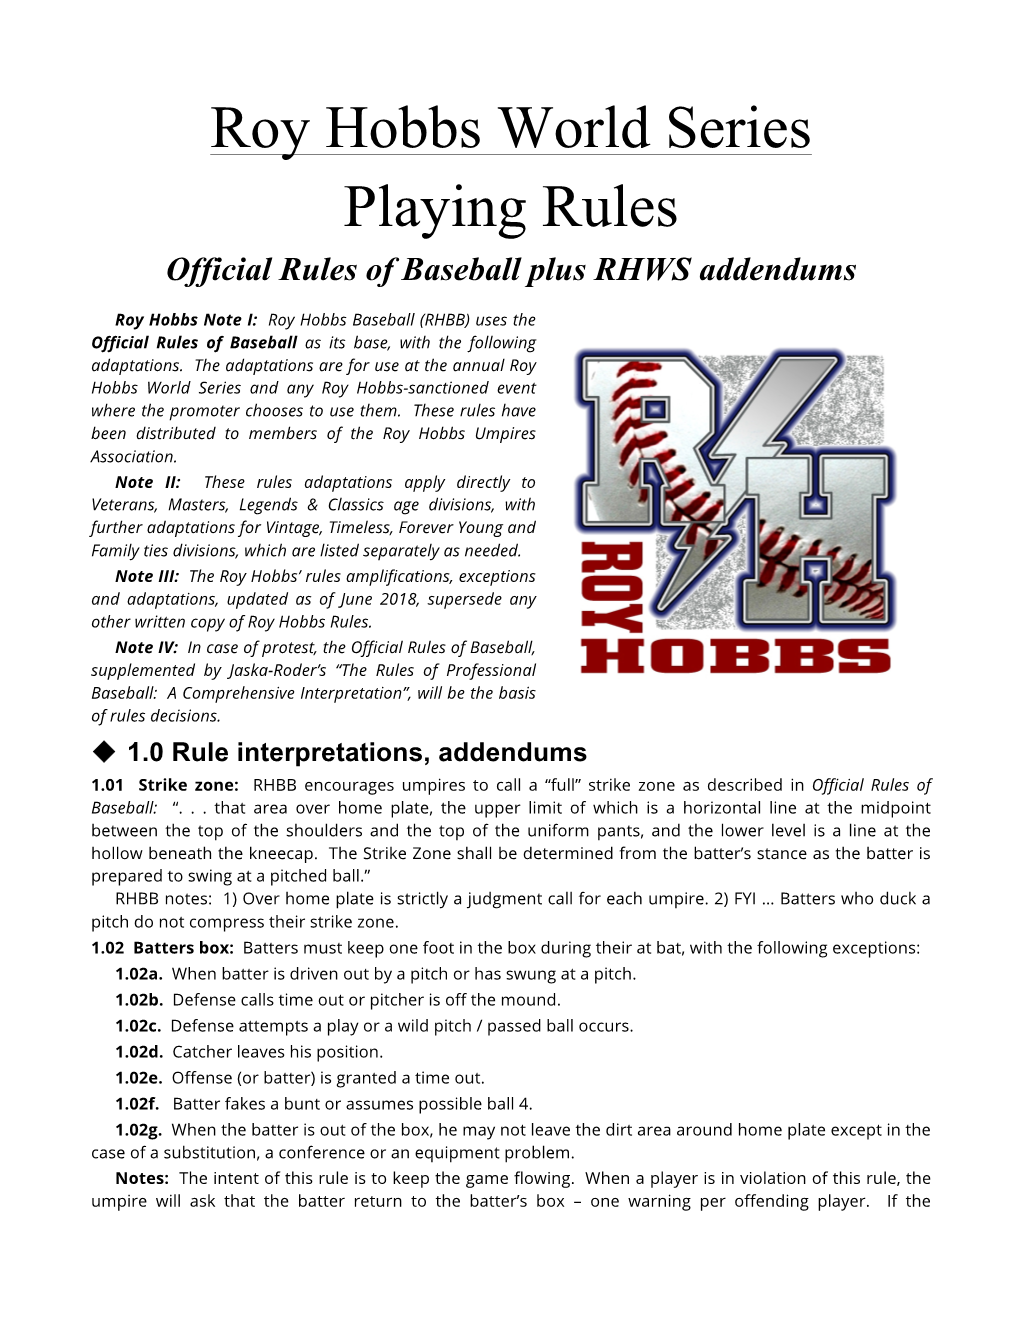 Roy Hobbs World Series Playing Rules Official Rules of Baseball Plus RHWS Addendums